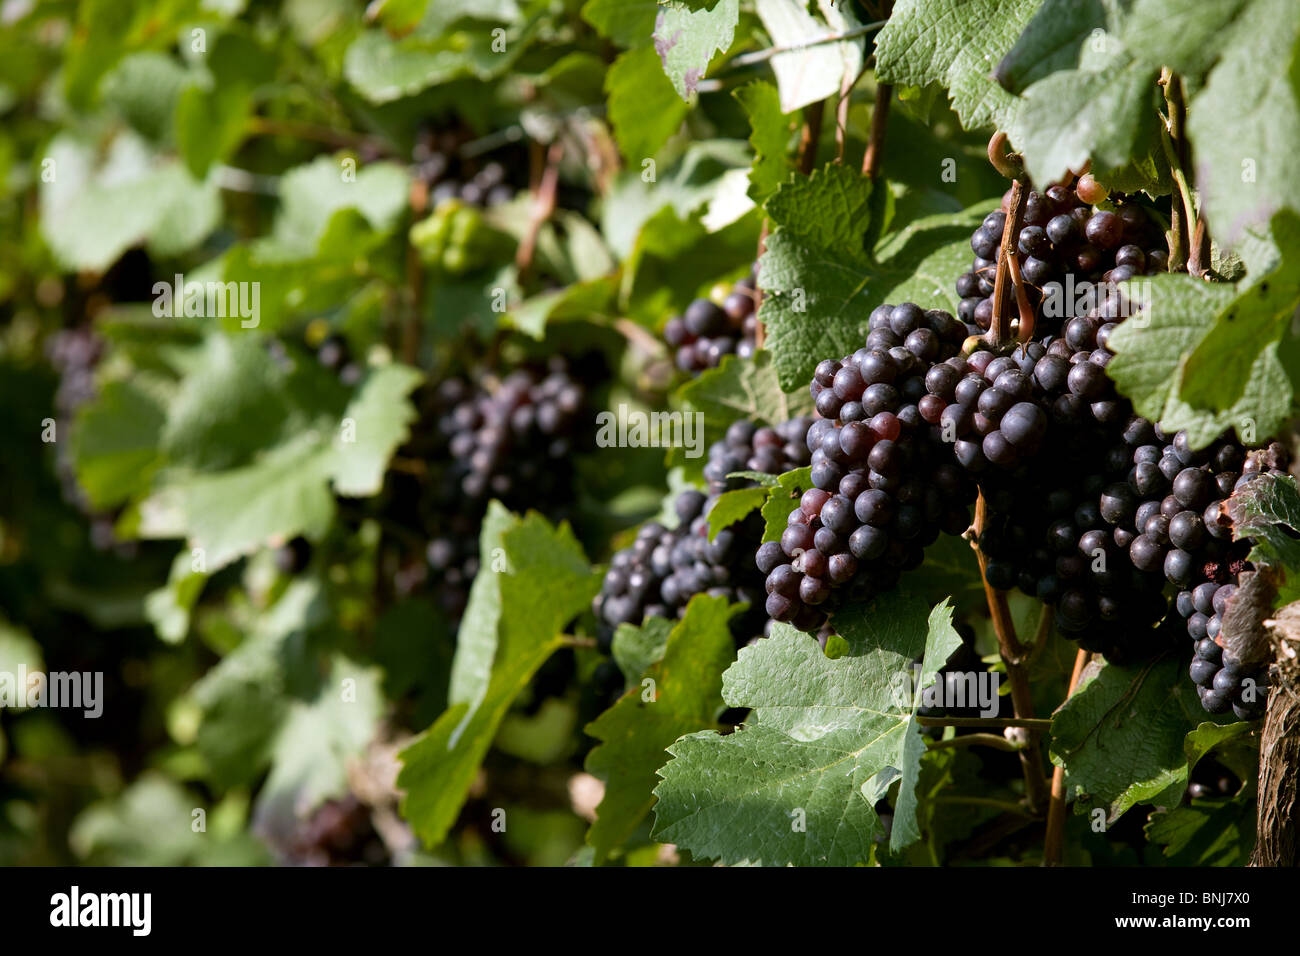 France, Champagne, Vineyards, Grapes, Epernay, pinot noir Stock Photo